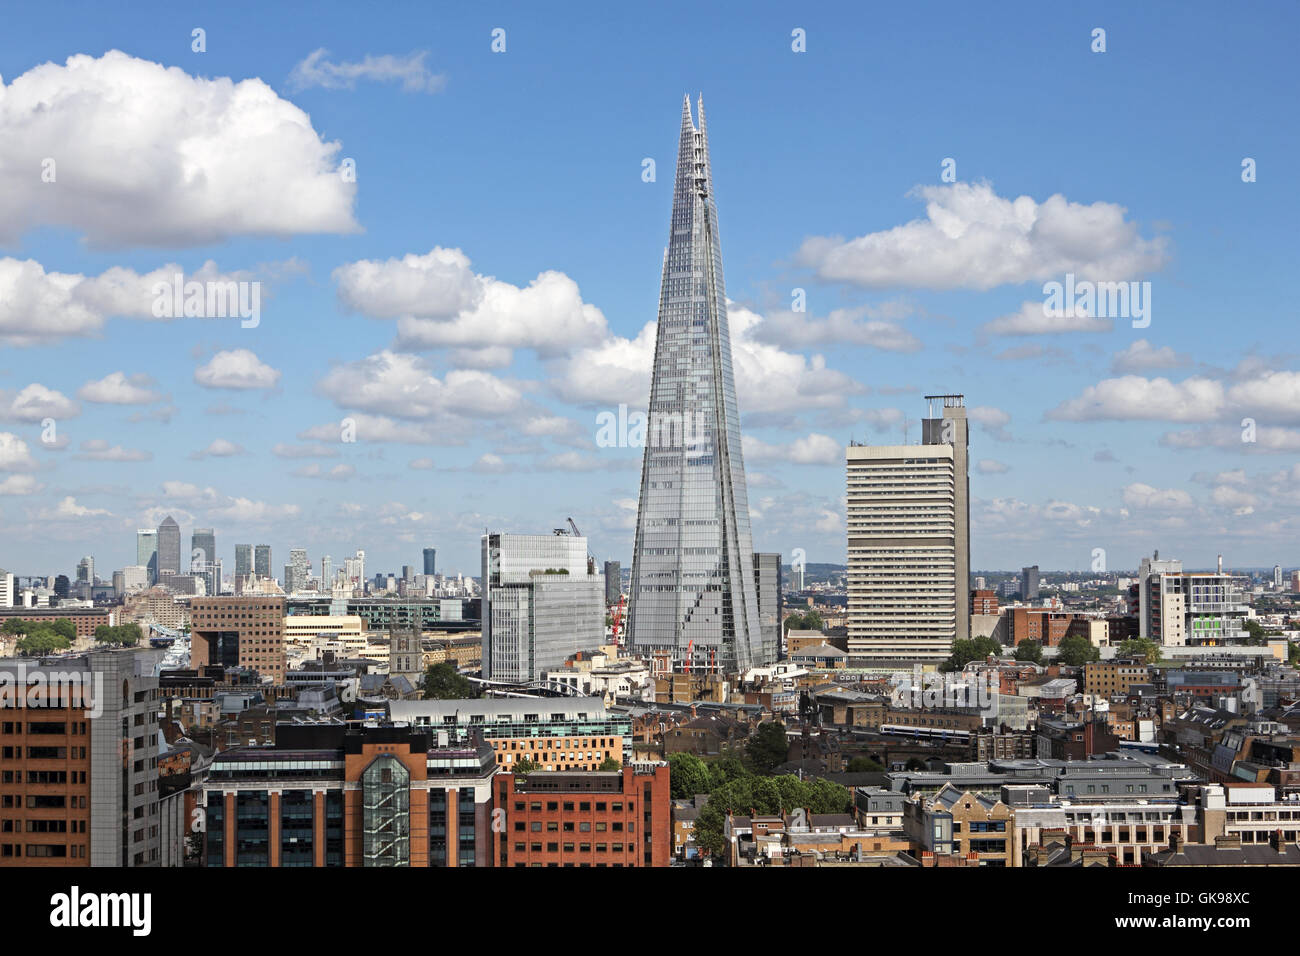 The Shard Modern glass building viewed from the Tate Modern in London, England, UK. Stock Photo